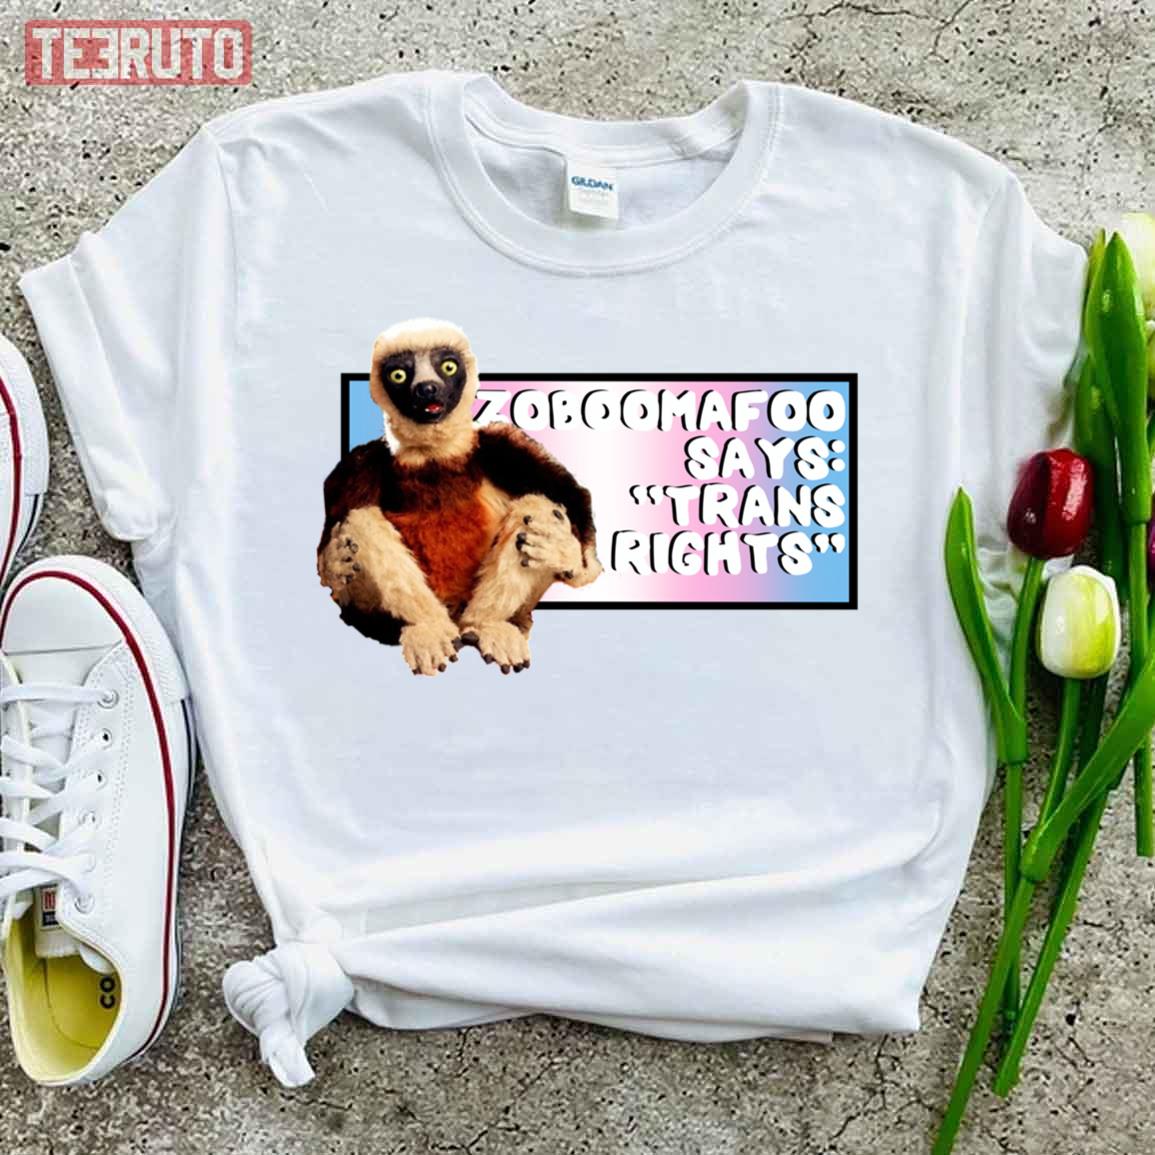 Zoboomafoo Says Trans Rights Unisex T-Shirt